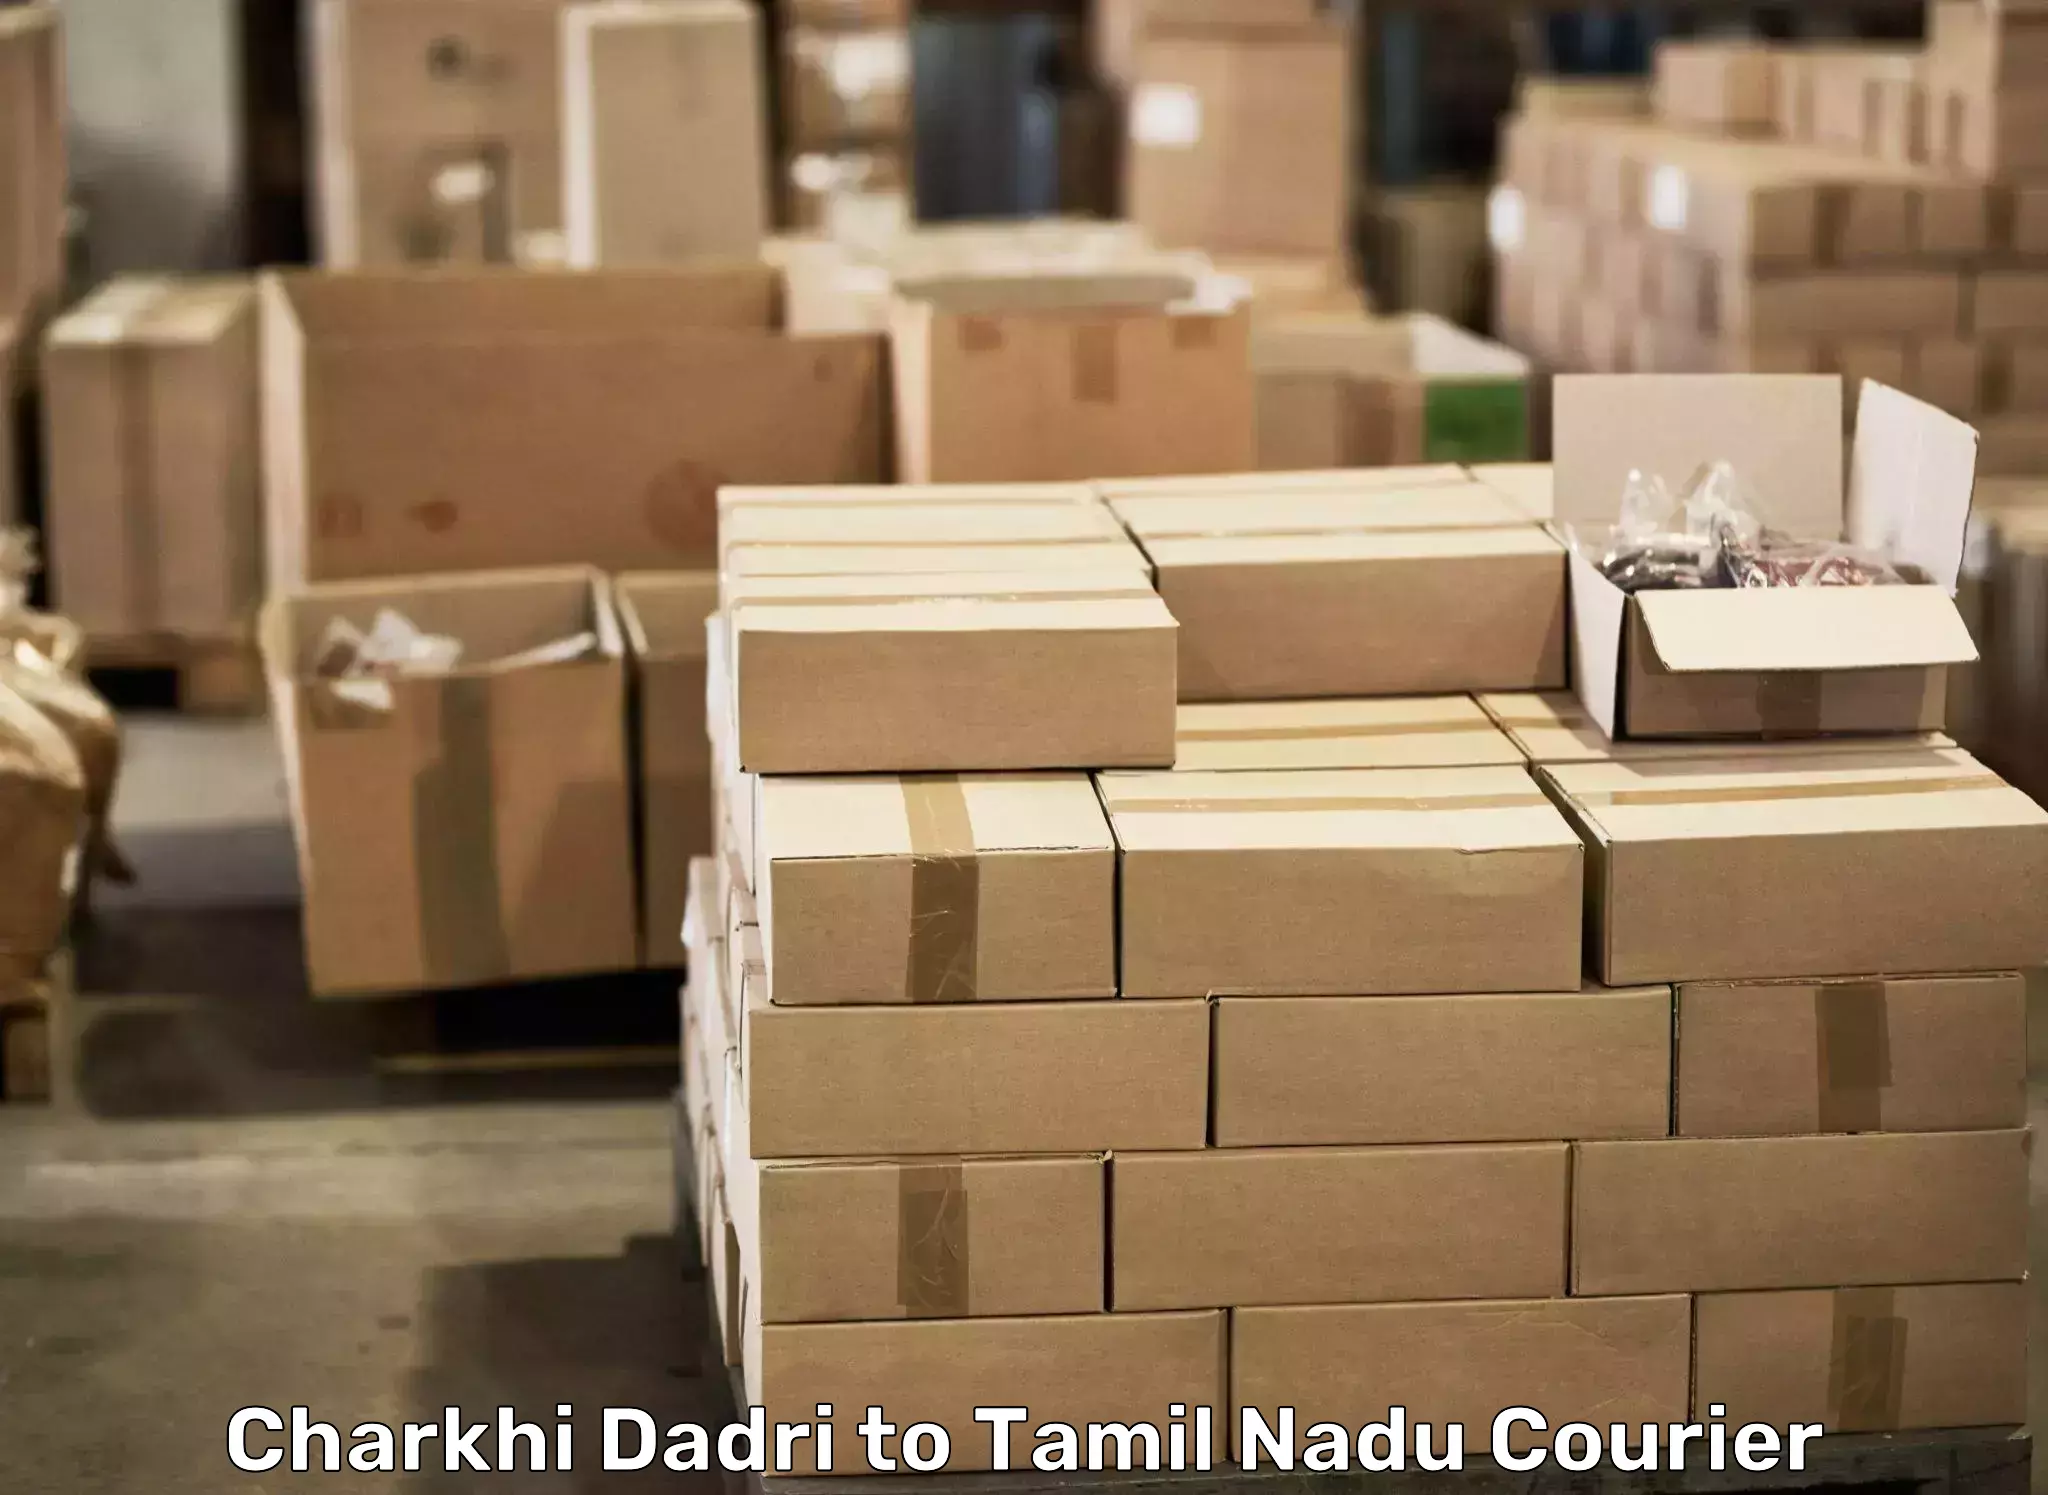 Furniture moving assistance Charkhi Dadri to Shanmugha Arts Science Technology and Research Academy Thanjavur